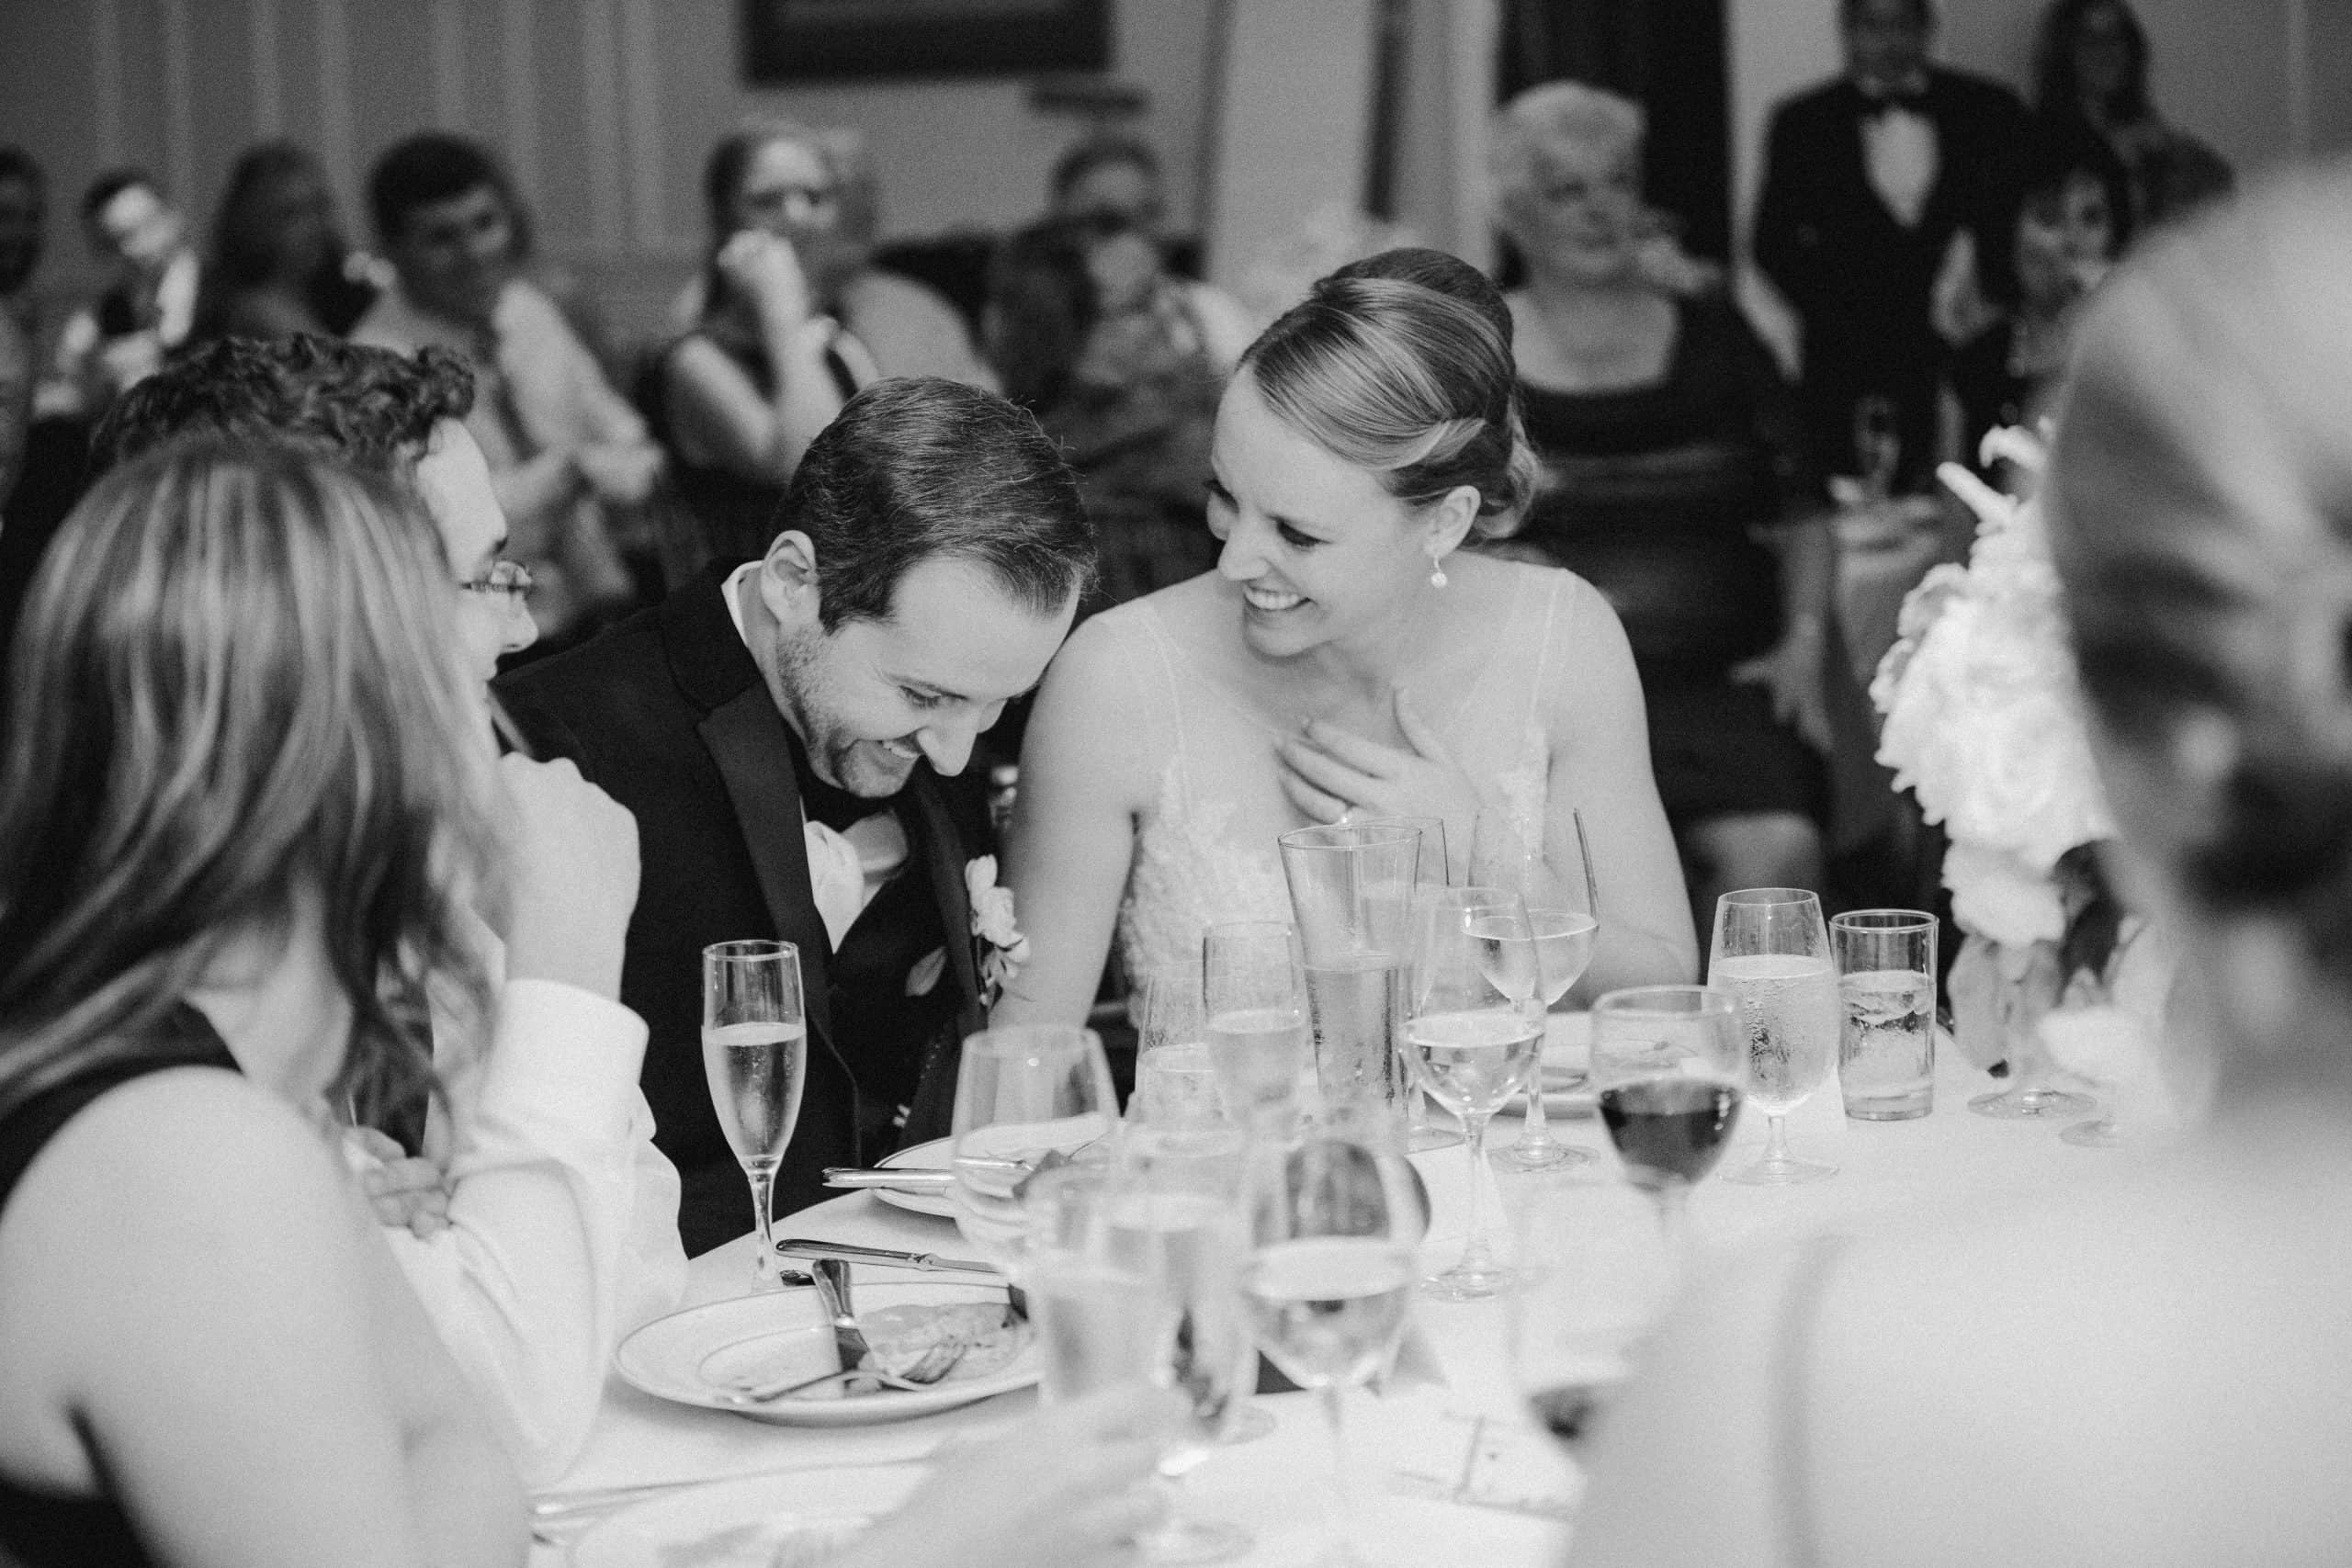 A bride and groom share a sweet moment during their Waverley Country Club wedding reception.